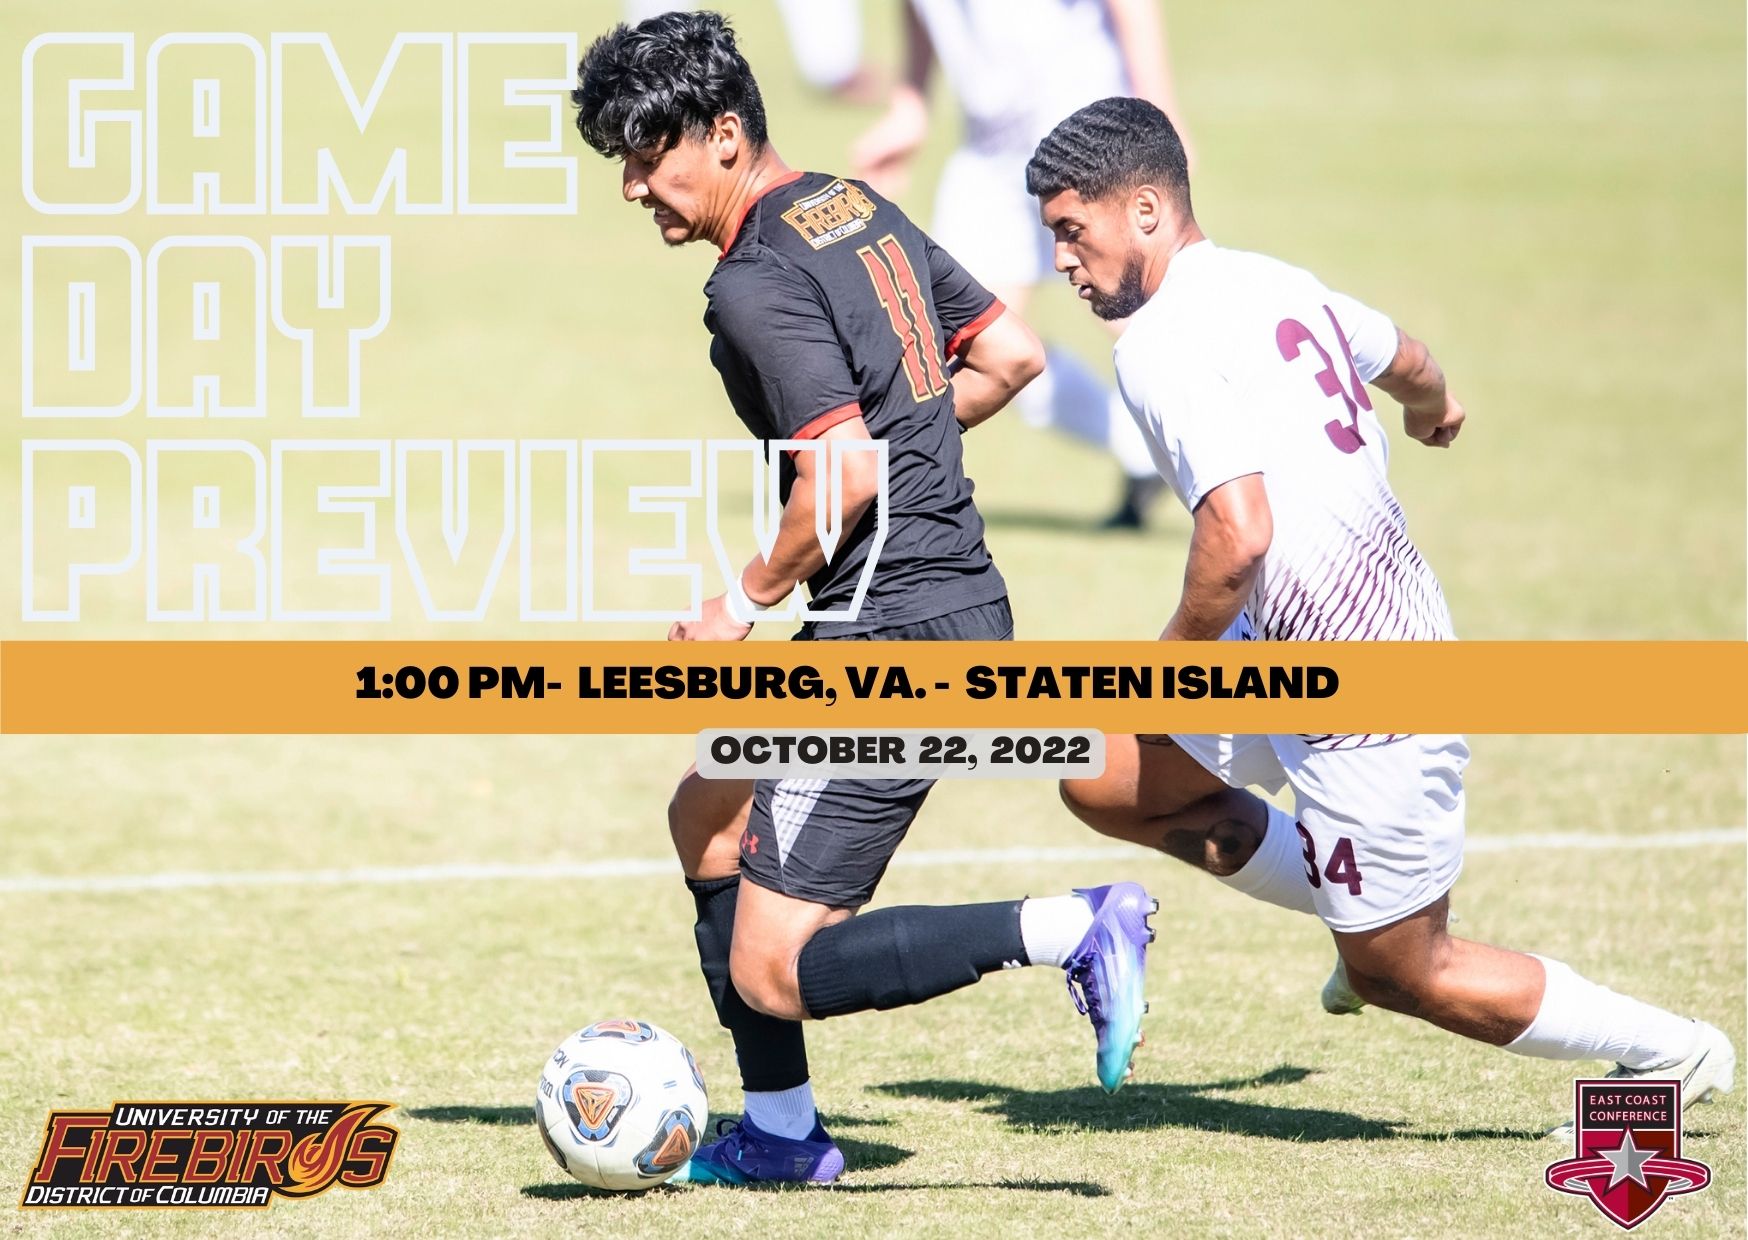 MEN'S SOCCER: GAME DAY PREVIEW 10/22